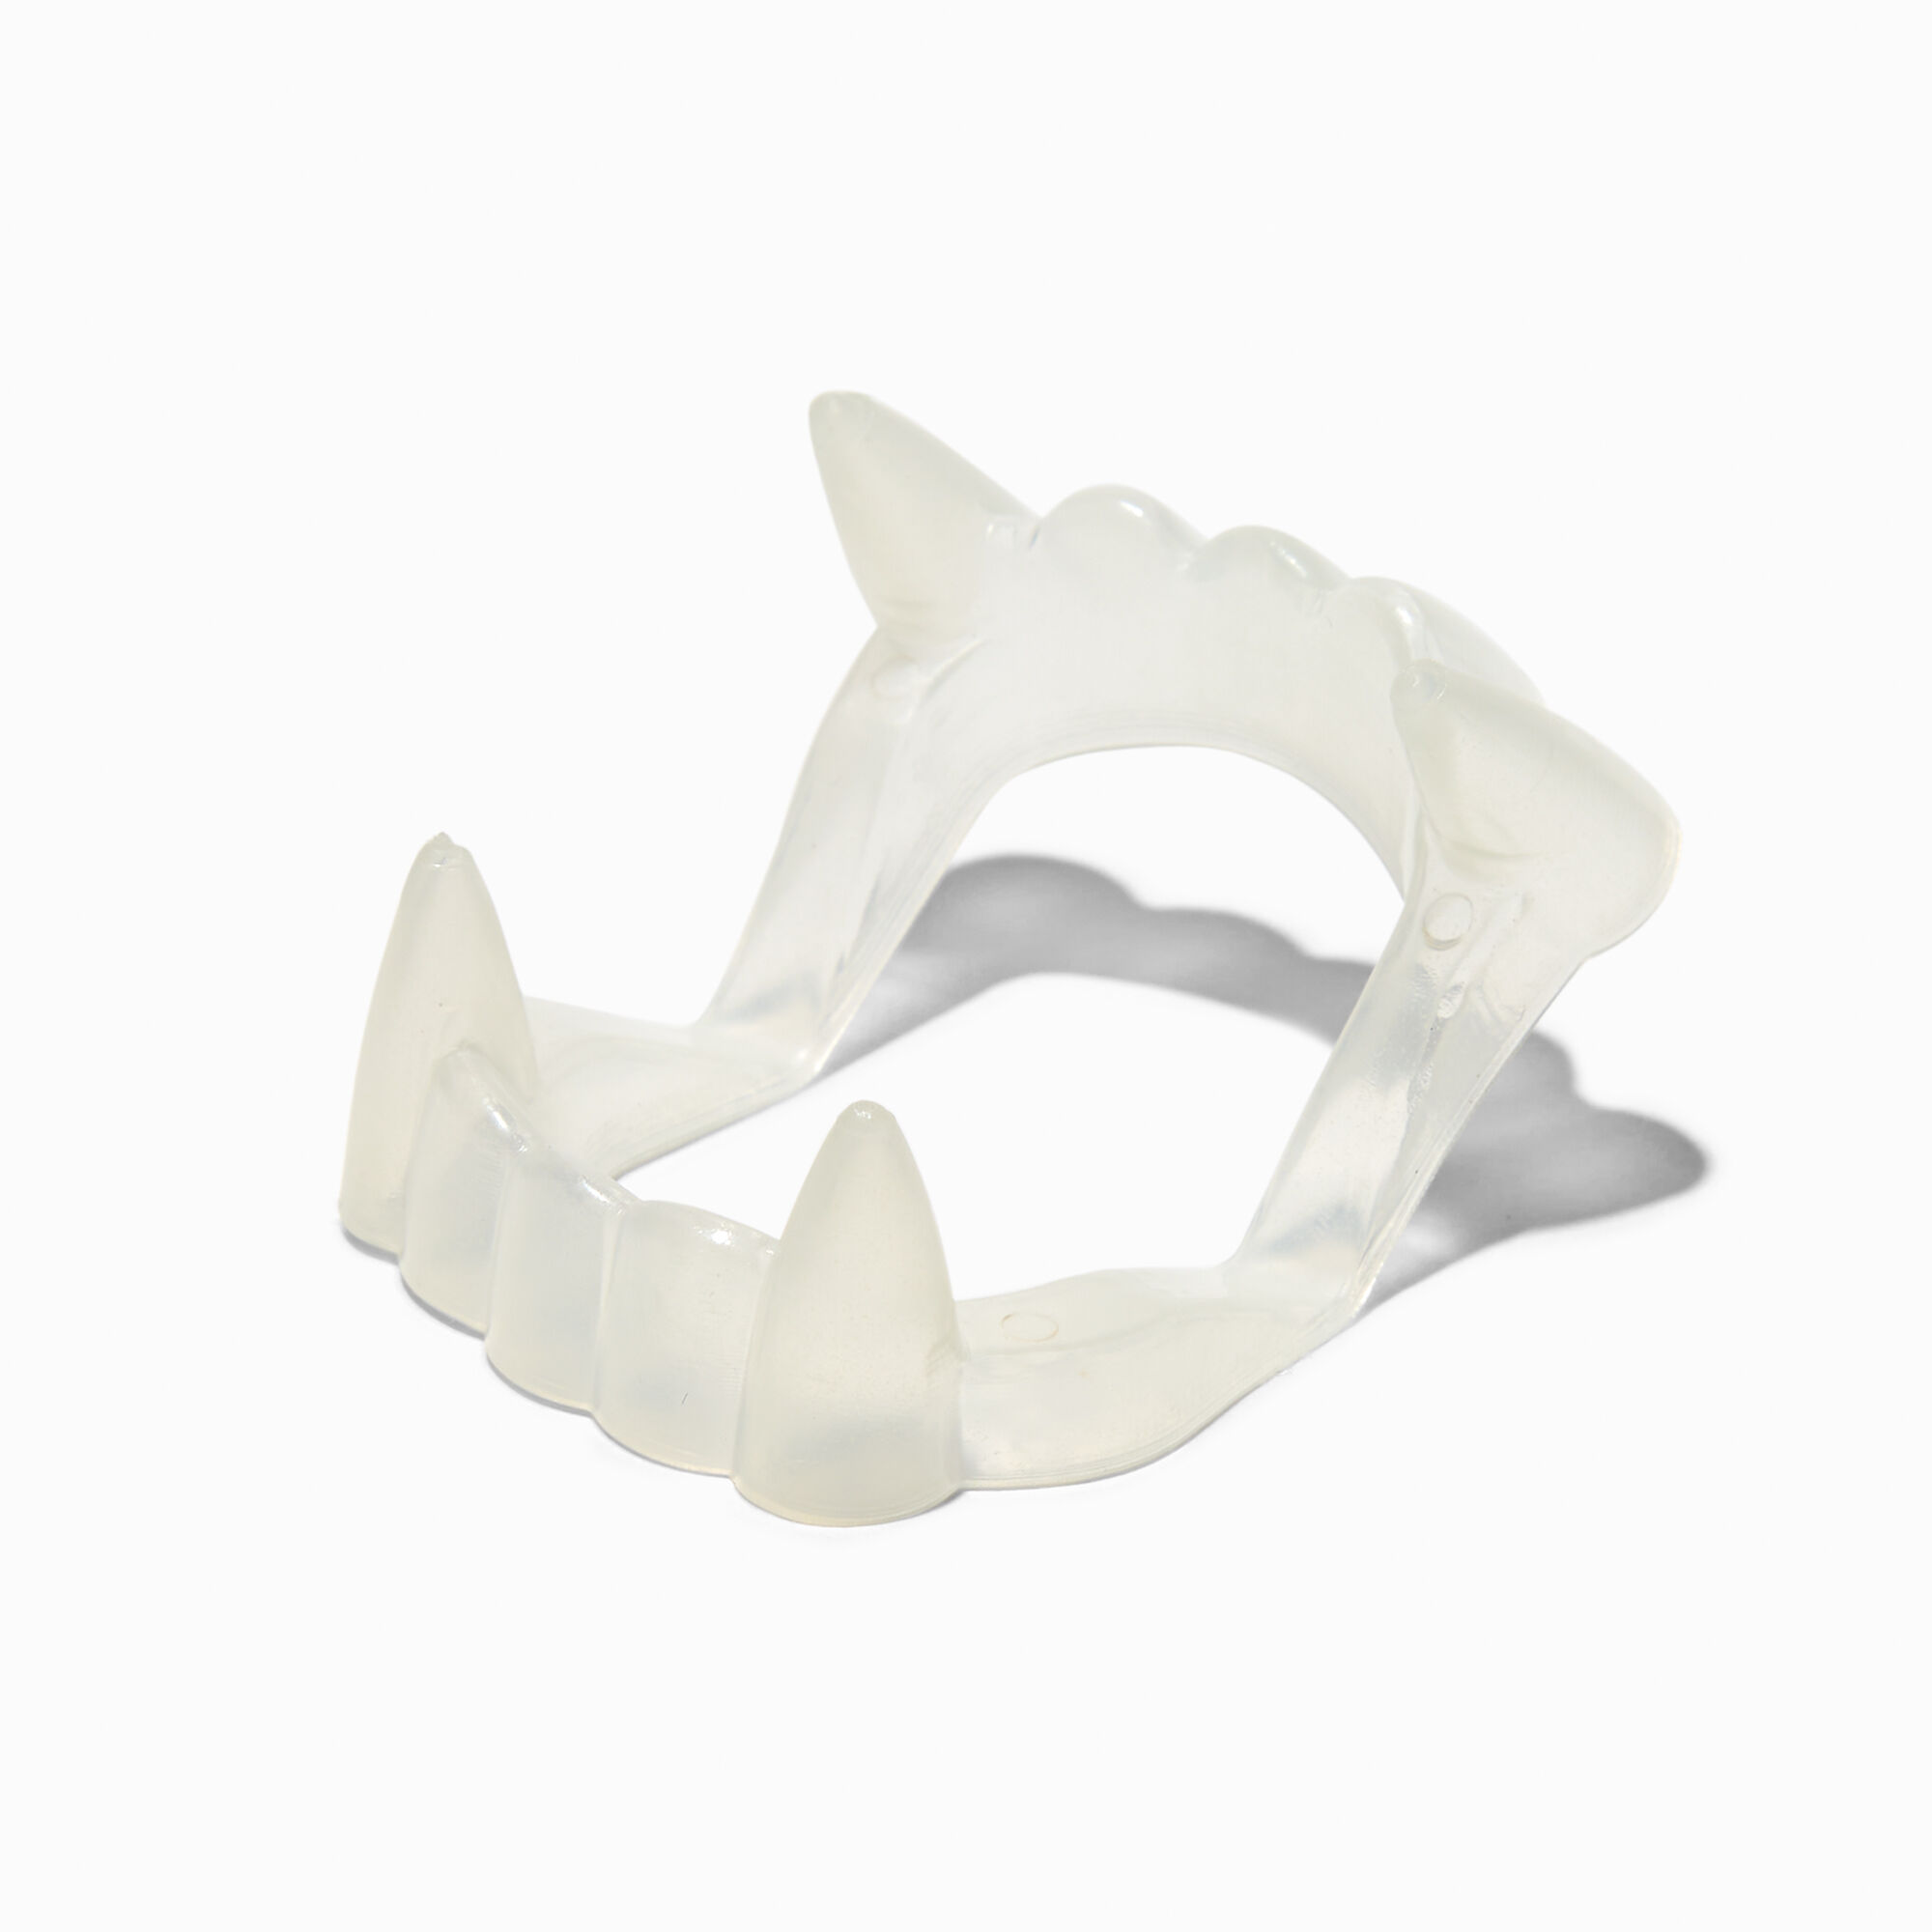 View Claires Glow In The Dark Fangs information